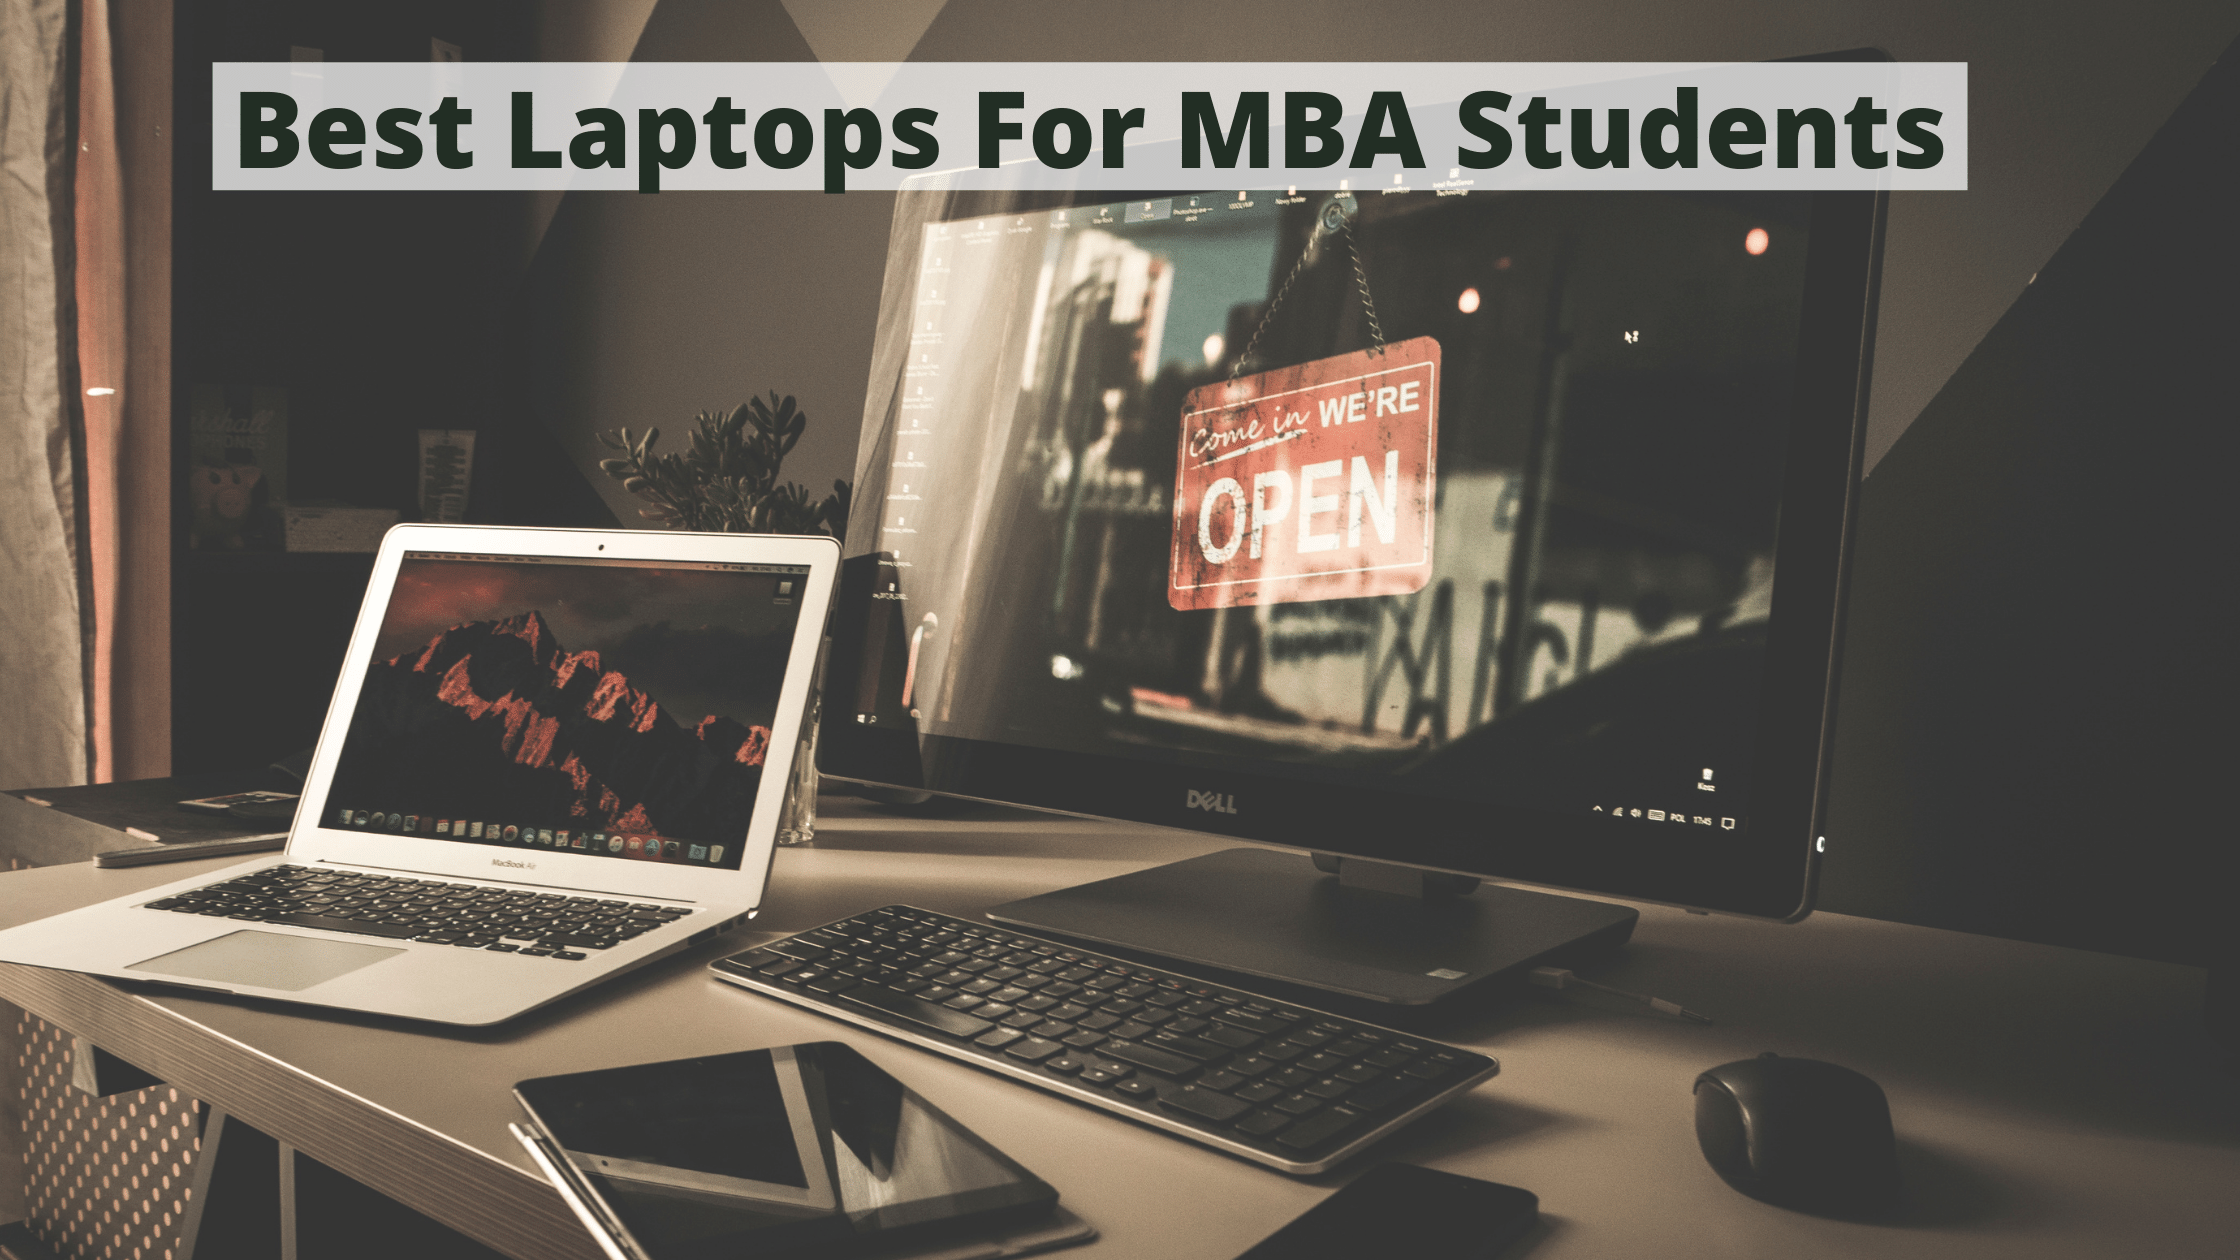 Top 5 Best Laptops For MBA Students to Buy